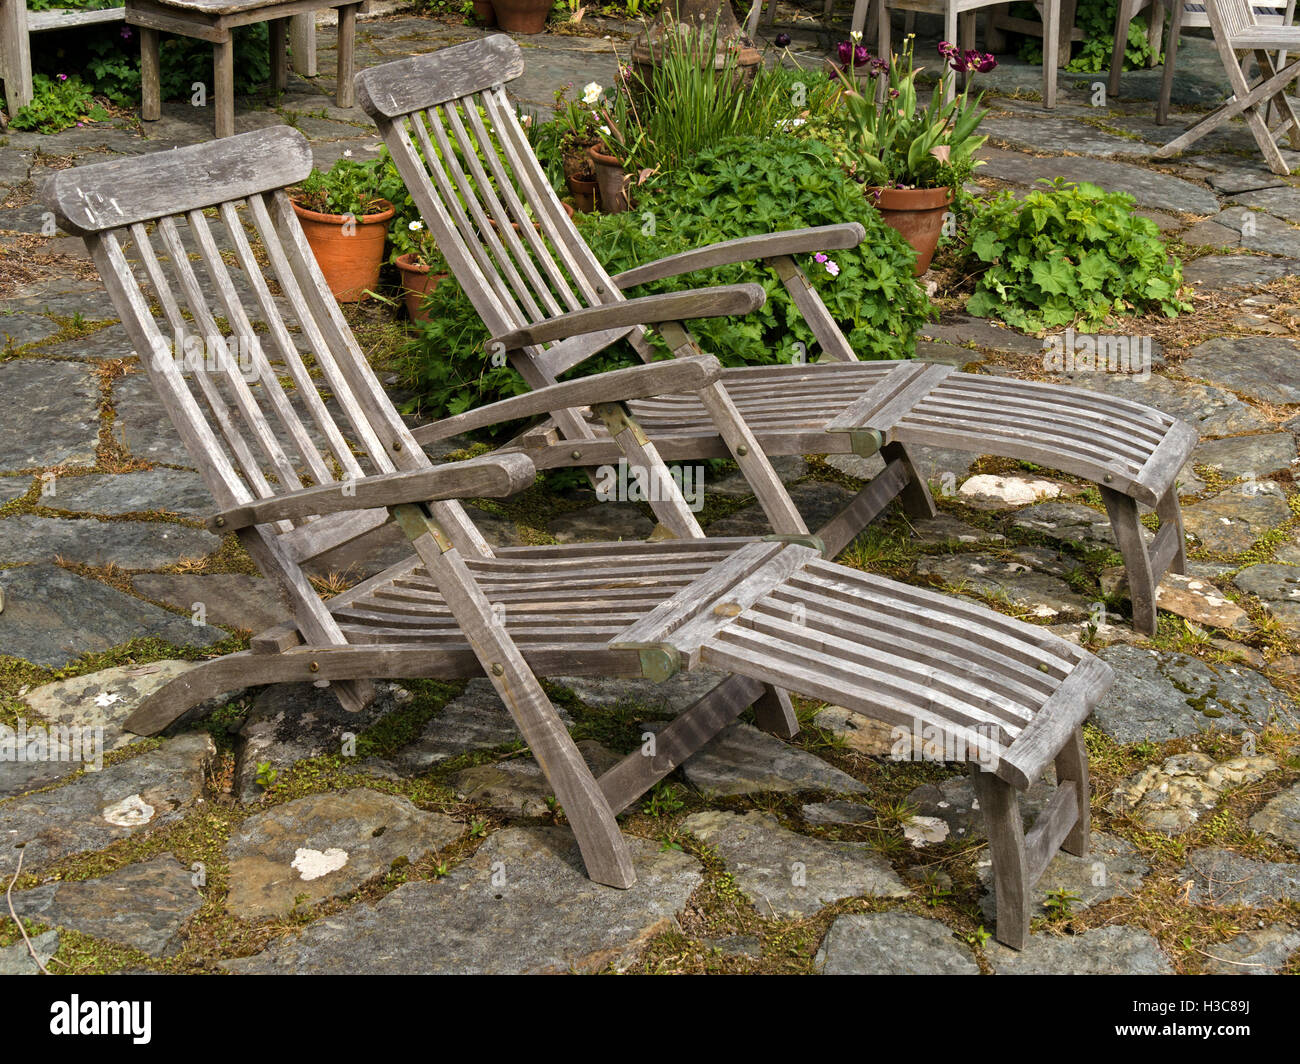 Two old wooden deck loungers on stone patio, Colonsay House Gardens, Isle of Colonsay, Scotland, UK. Stock Photo